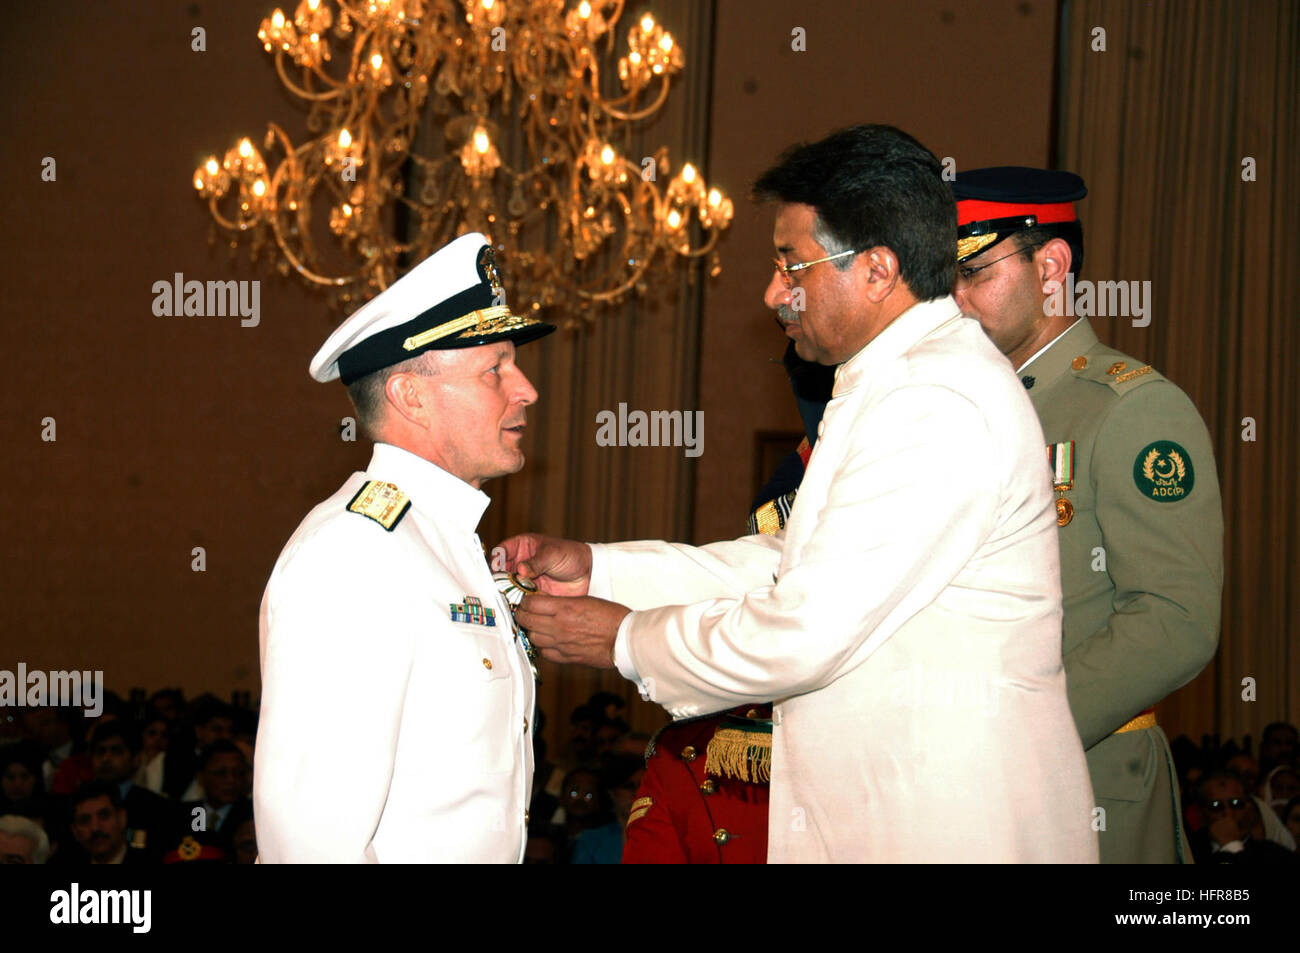 070323-O-0000X-001 ISLAMABAD, Pakistan (March 23, 2007) - Pakistan President Pervez Musharraf presents Rear Adm. Michael A LeFever with the Crescent of Great Leader award, in a ceremony held at the Presidential Palace in Islamabad. LeFever was one of three to receive the high honor, from the President during Pakistan's Military Day, for his efforts while serving as Commander of the Combined Disaster Assistance Center (CDAC) during earthquake relief efforts from the fall 2005 to spring 2006. Photo courtesy of U.S. Embassy in Pakistan (RELEASED) US Navy 070323-O-0000X-001 Pakistan President Perv Stock Photo